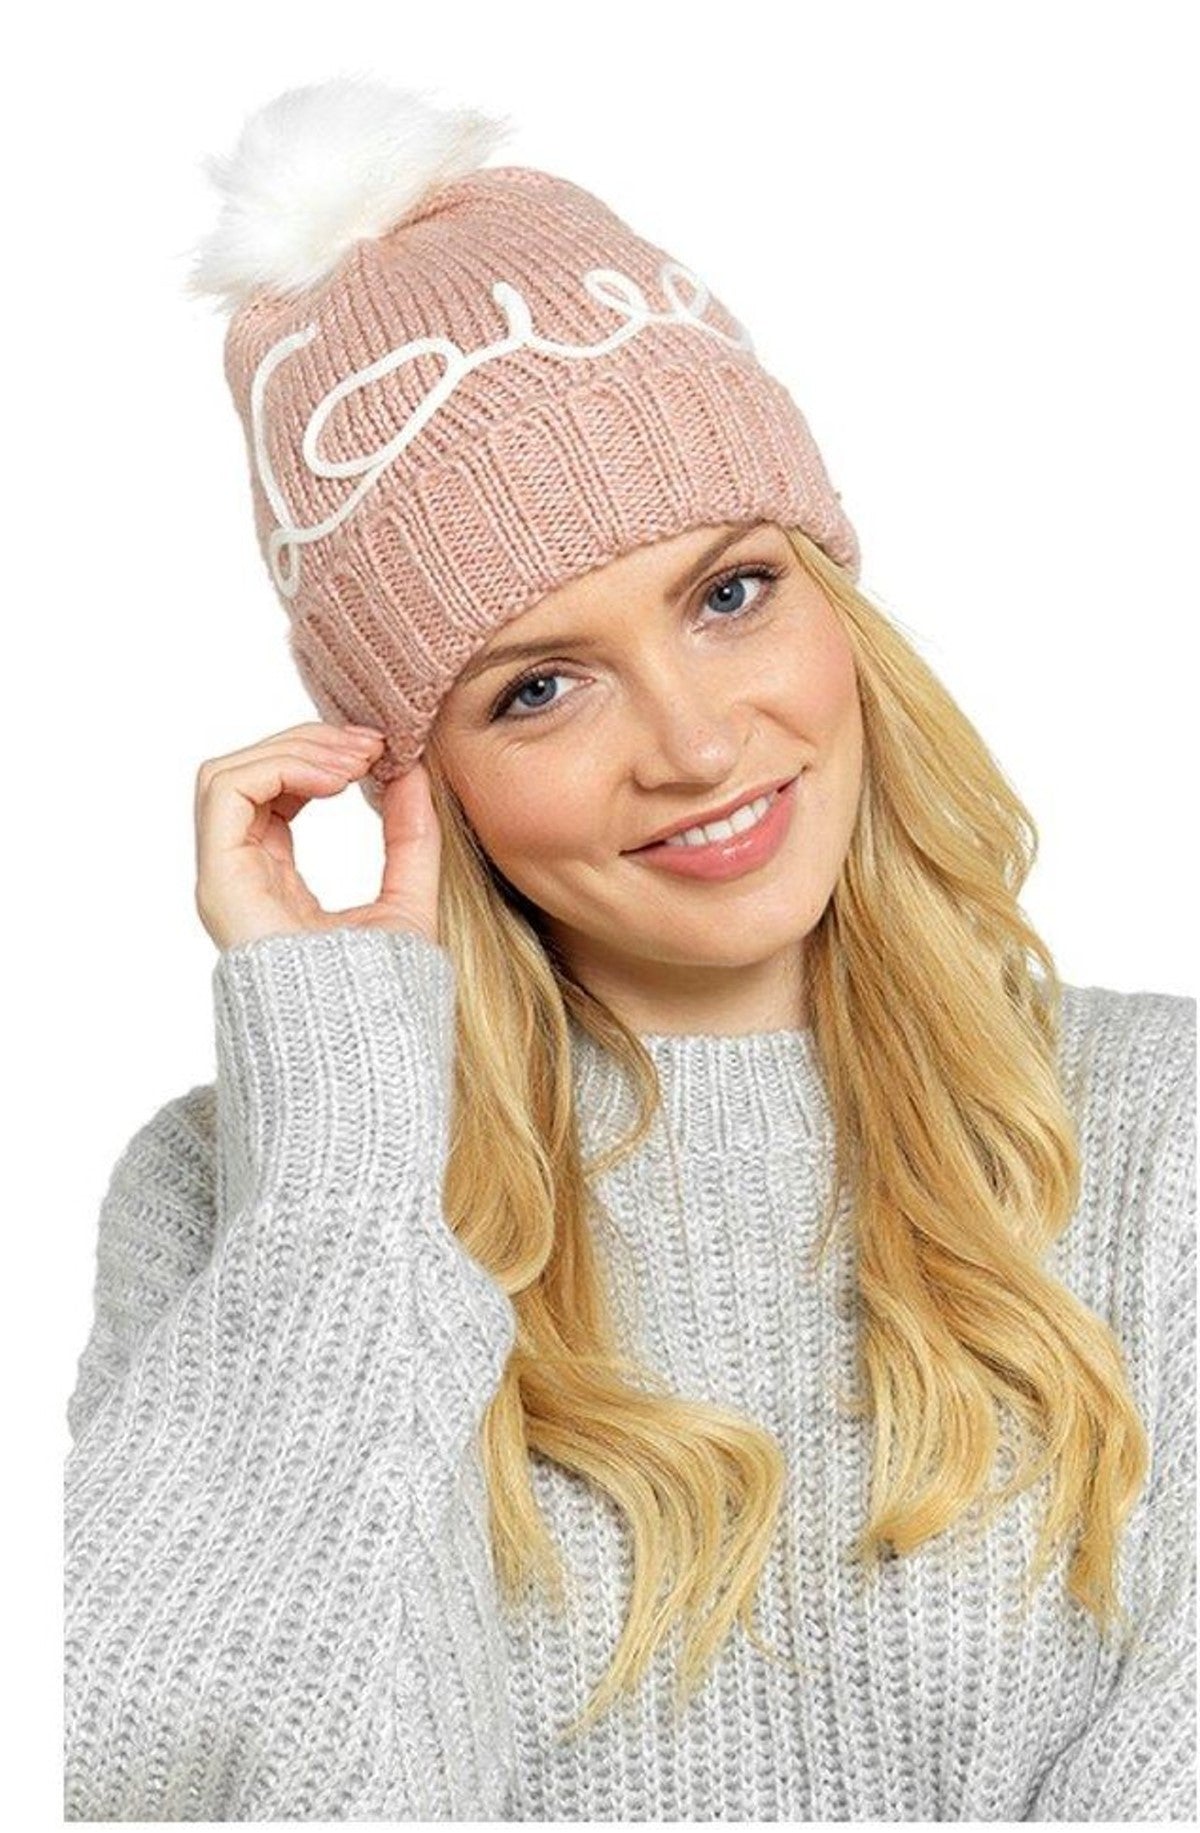 Ladies Bobble Hat Embroidered "Love" Knitted Beanie with Pom Pom